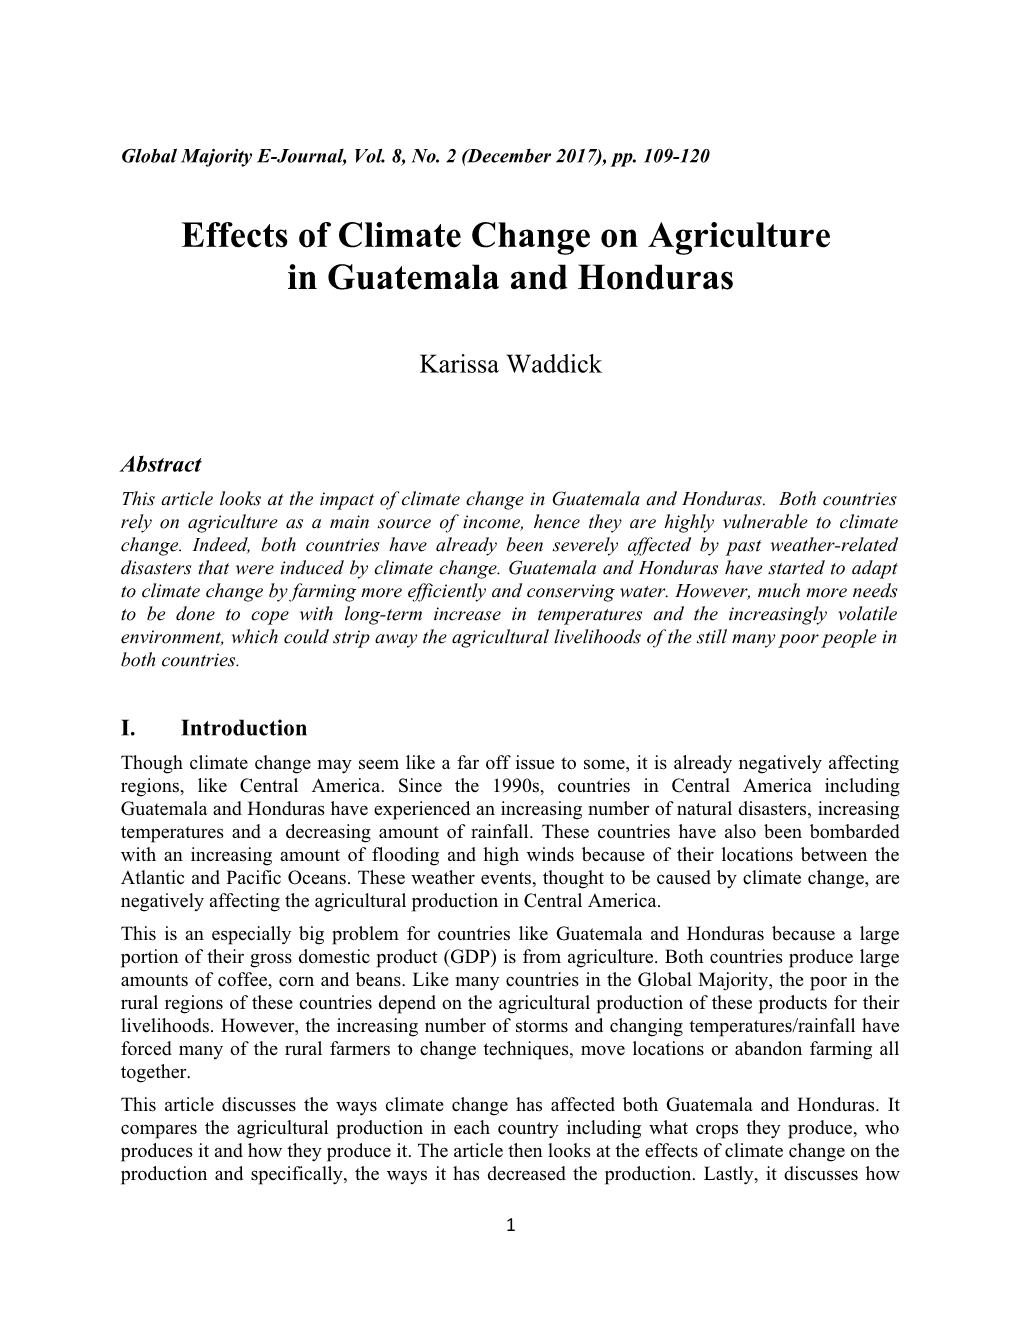 Effects of Climate Change on Agriculture